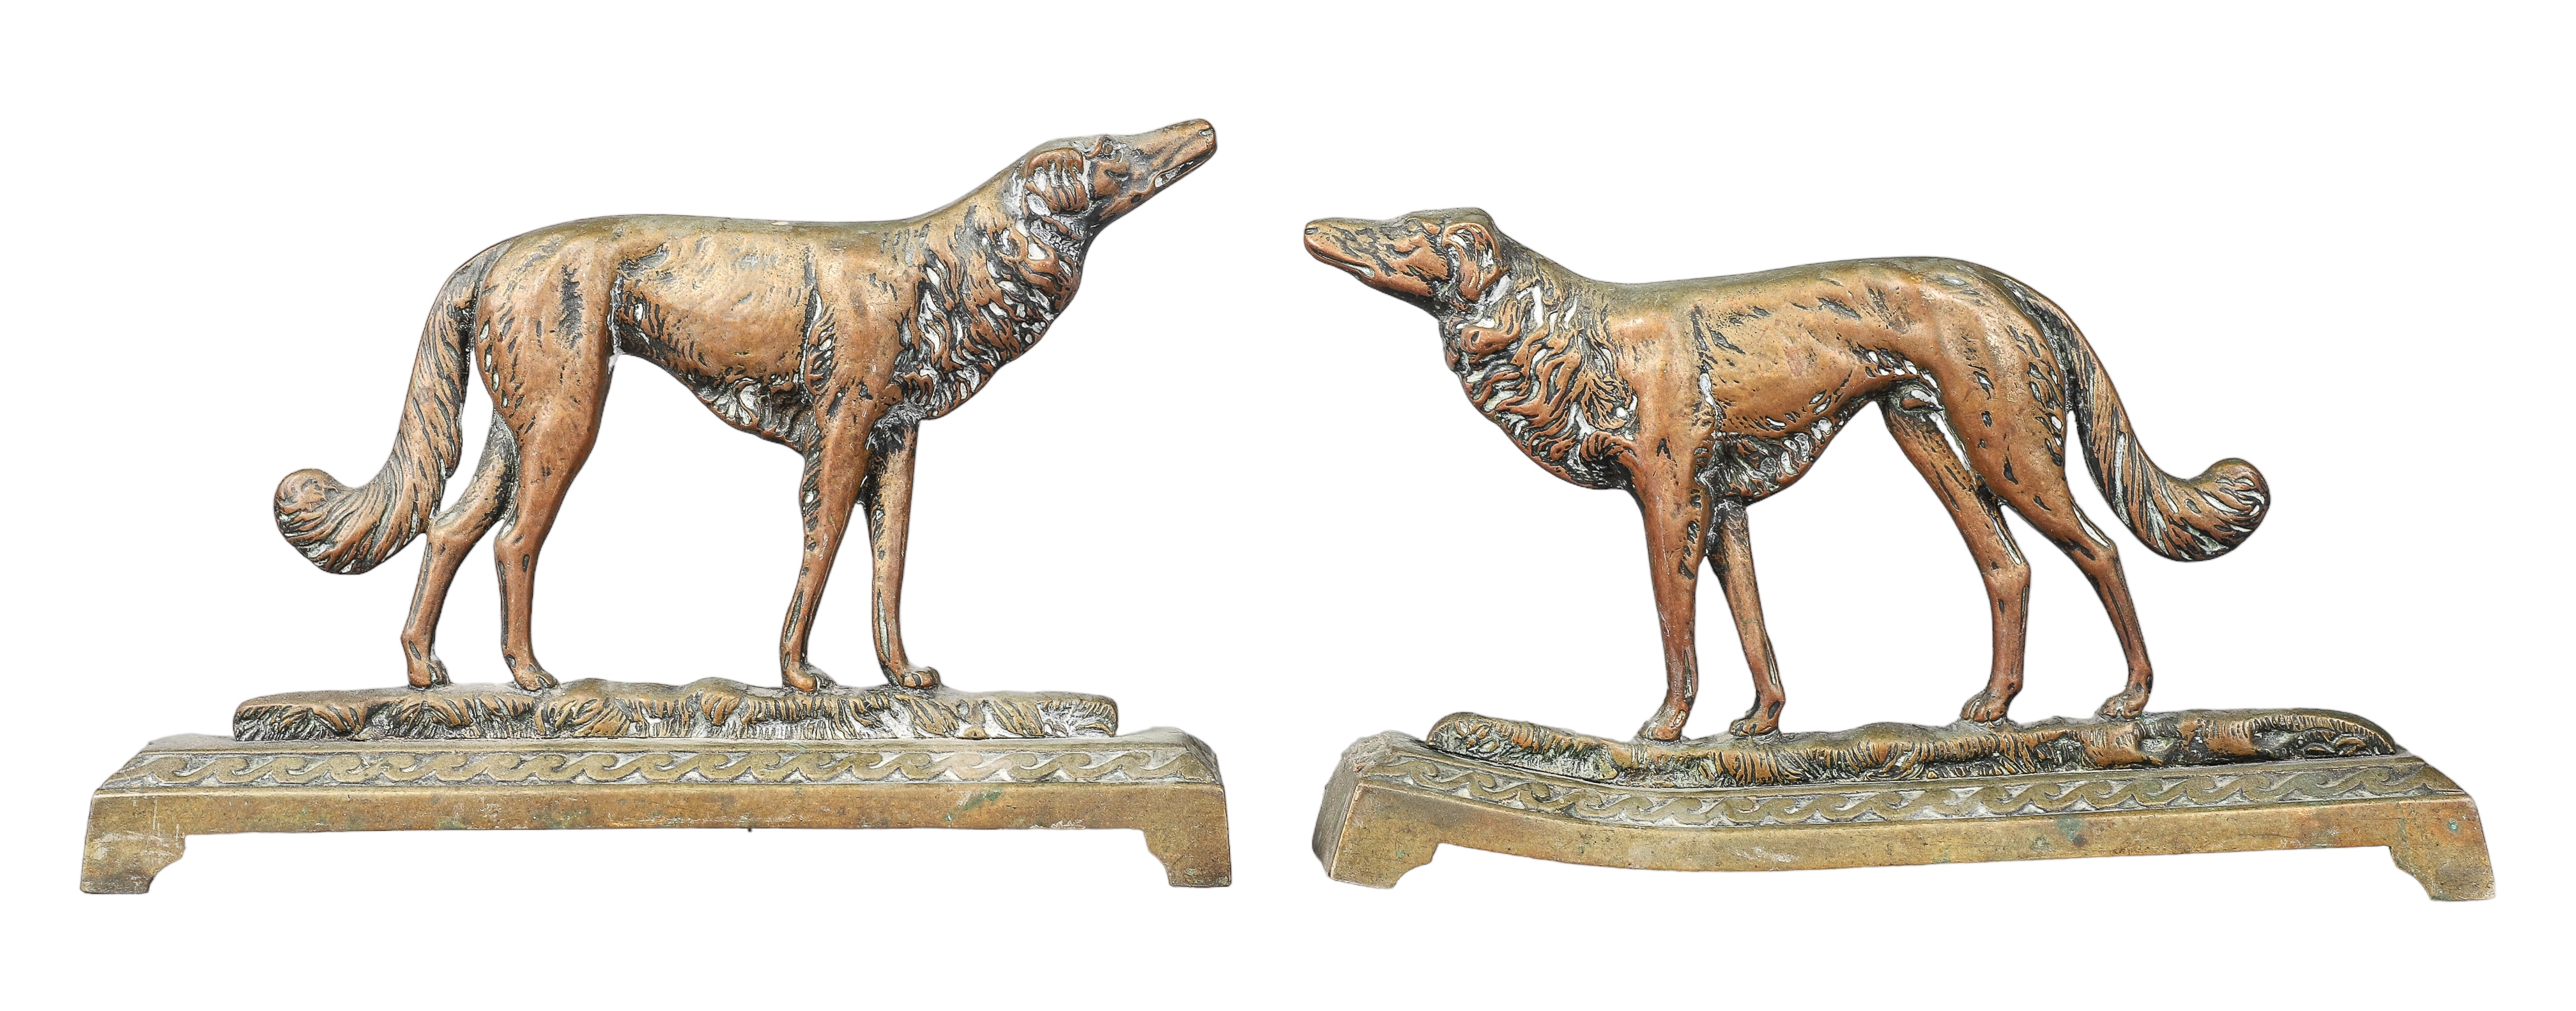 A pair of brass whippets, perhaps